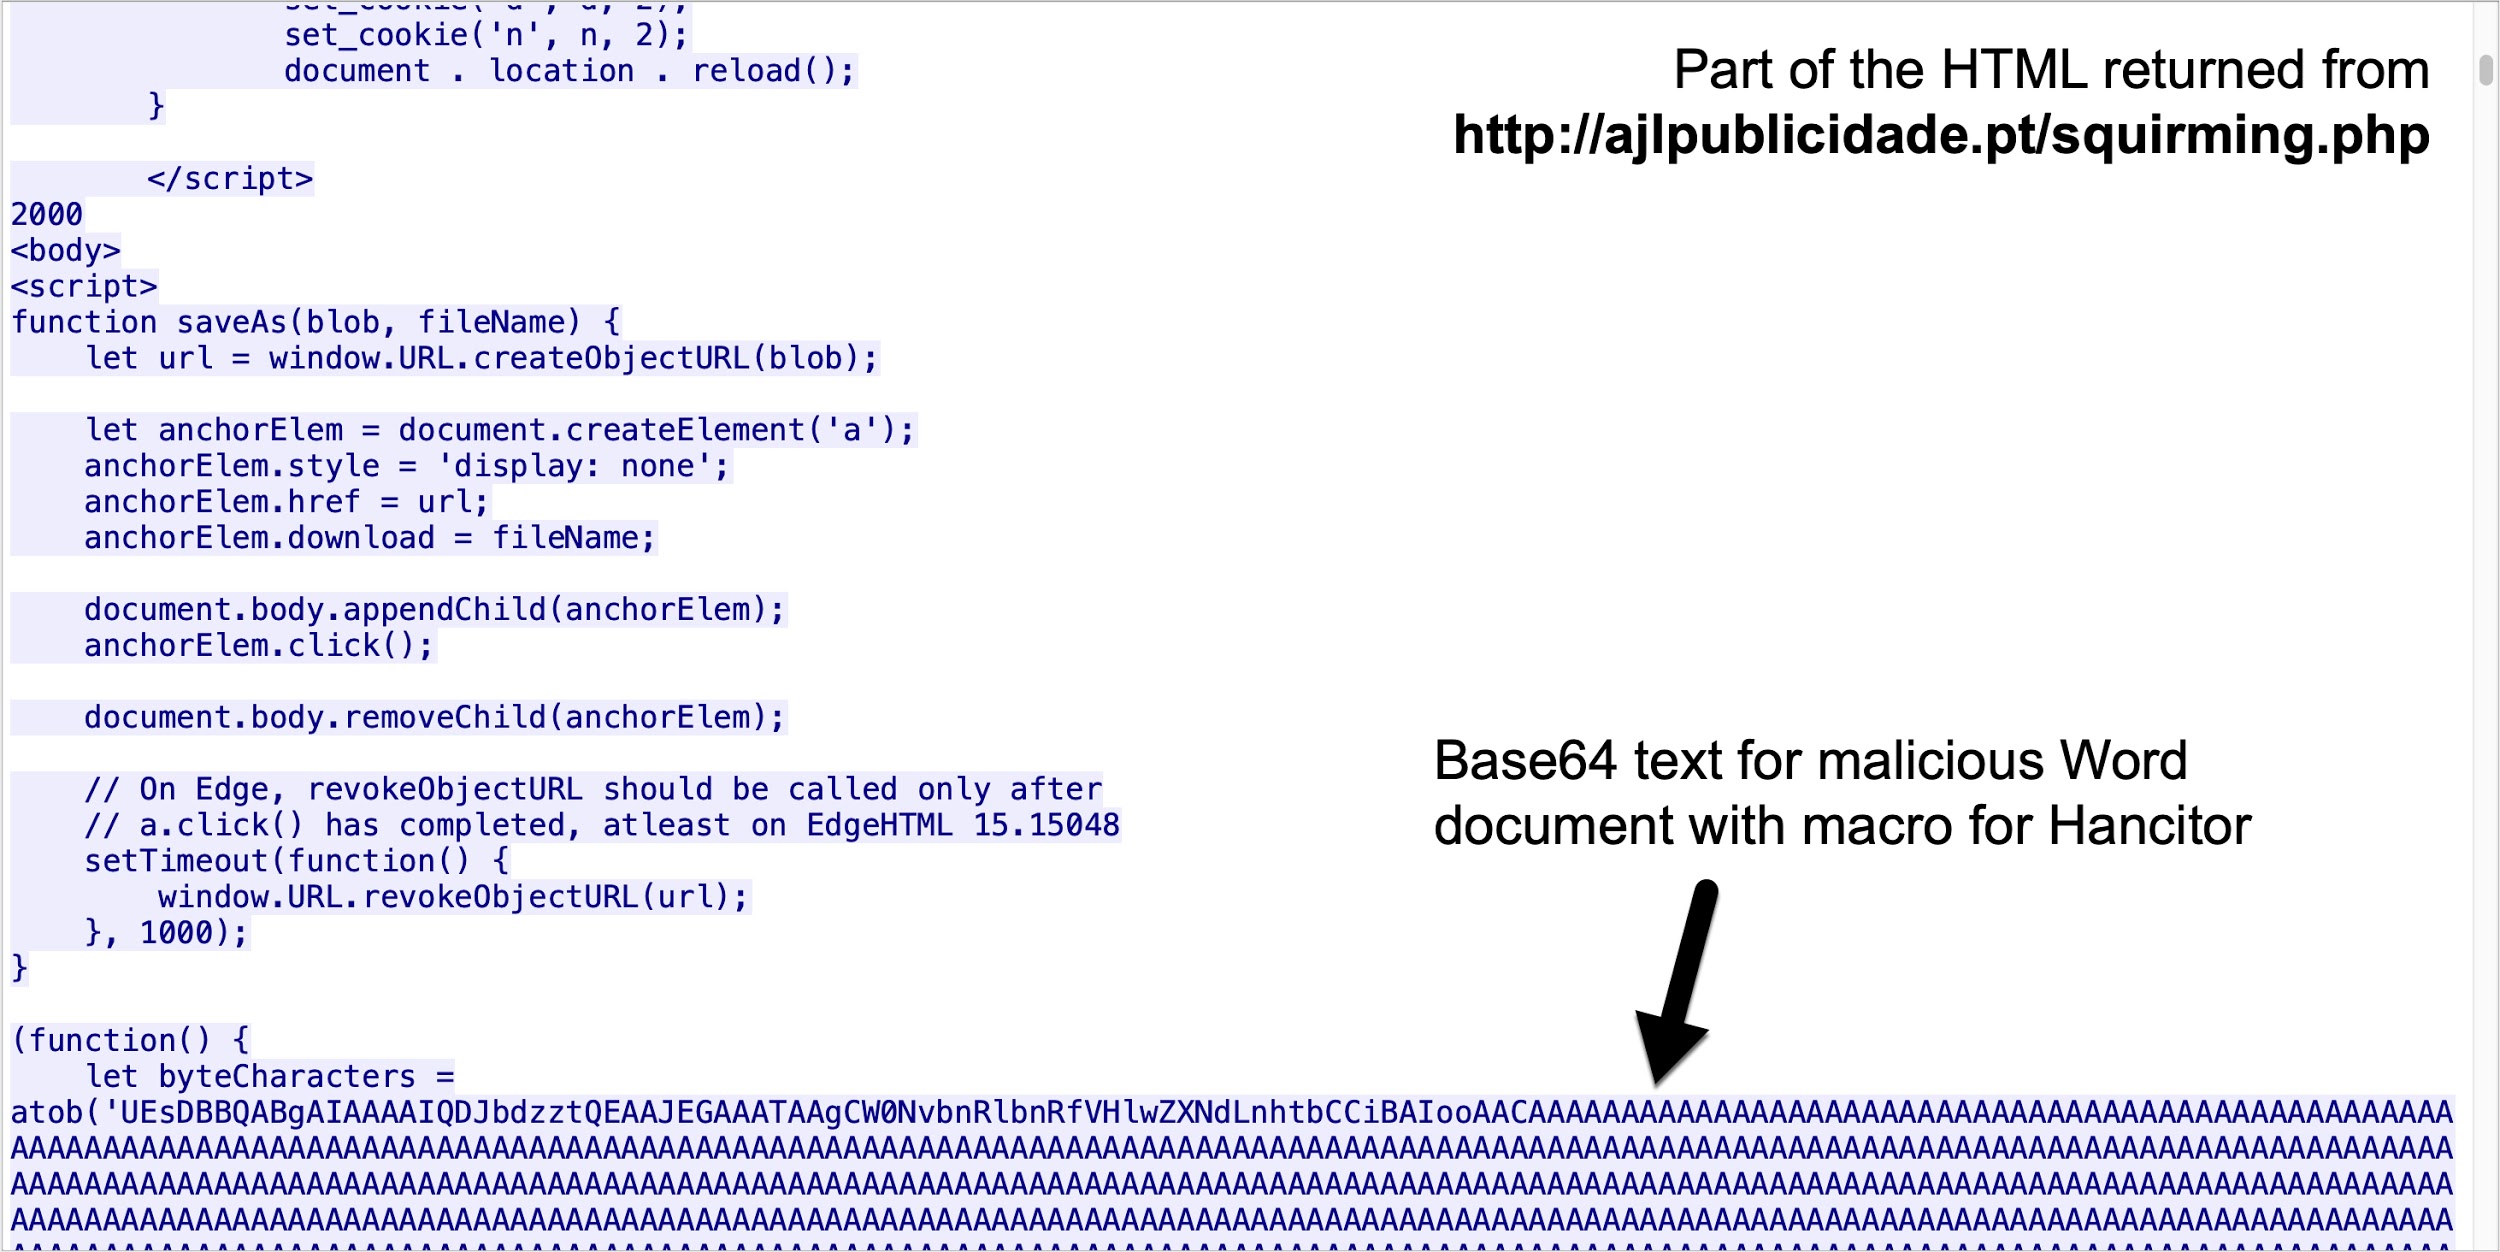 The page shown in Figure 4 contained a script with base64 text to create a malicious Word document. This script causes a browser to offer the malicious Word document for download, then redirects to a DocuSign page, as shown here and in Figure 6. 